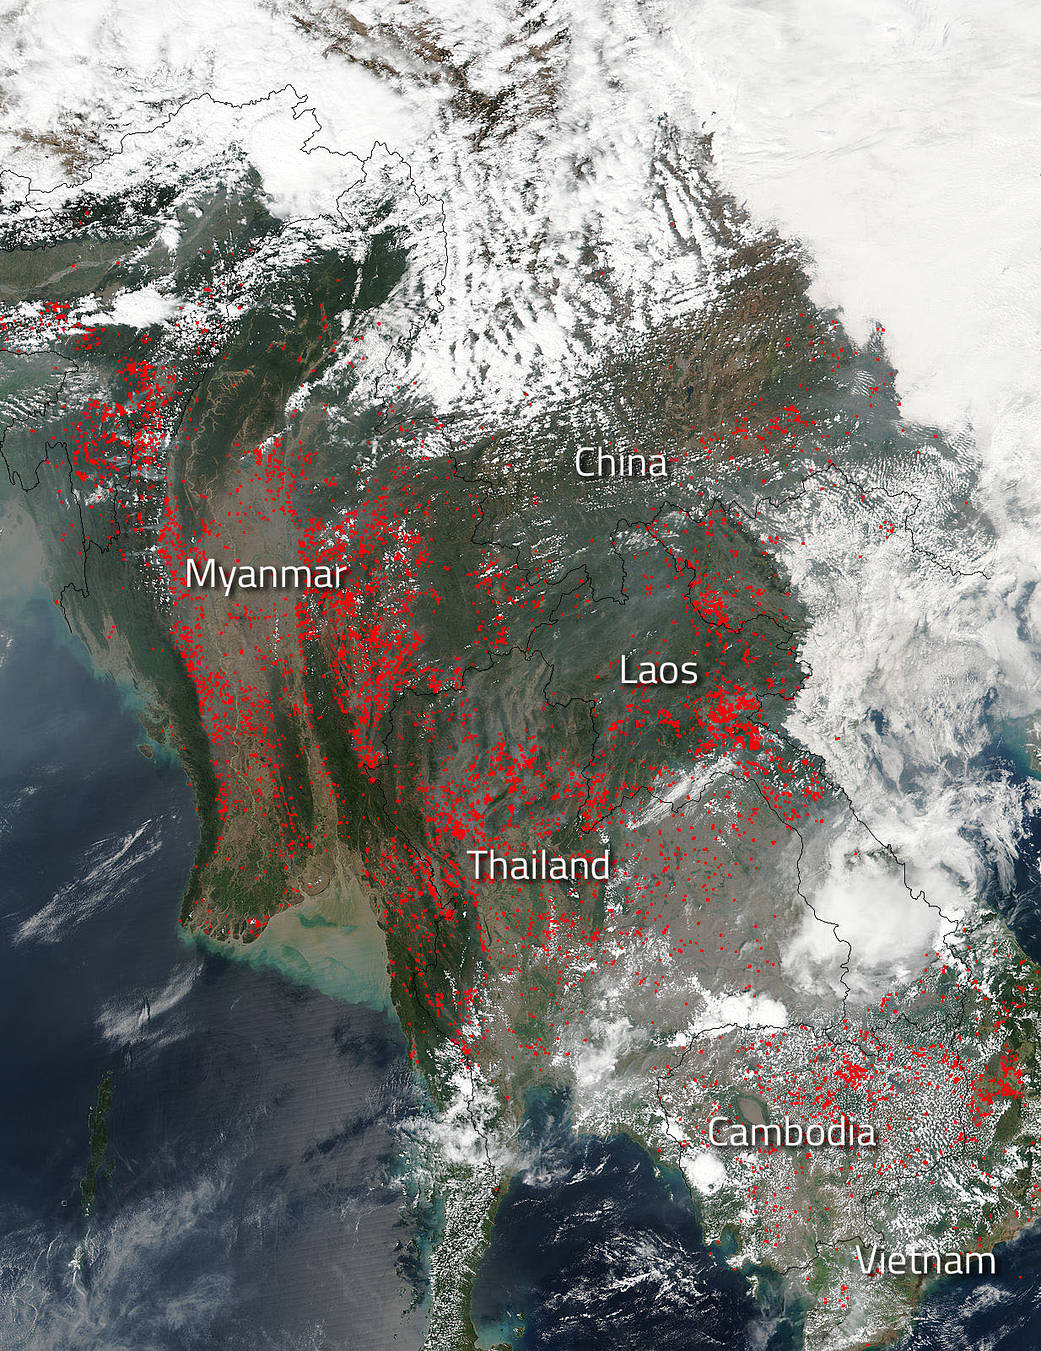 fires in Indochina